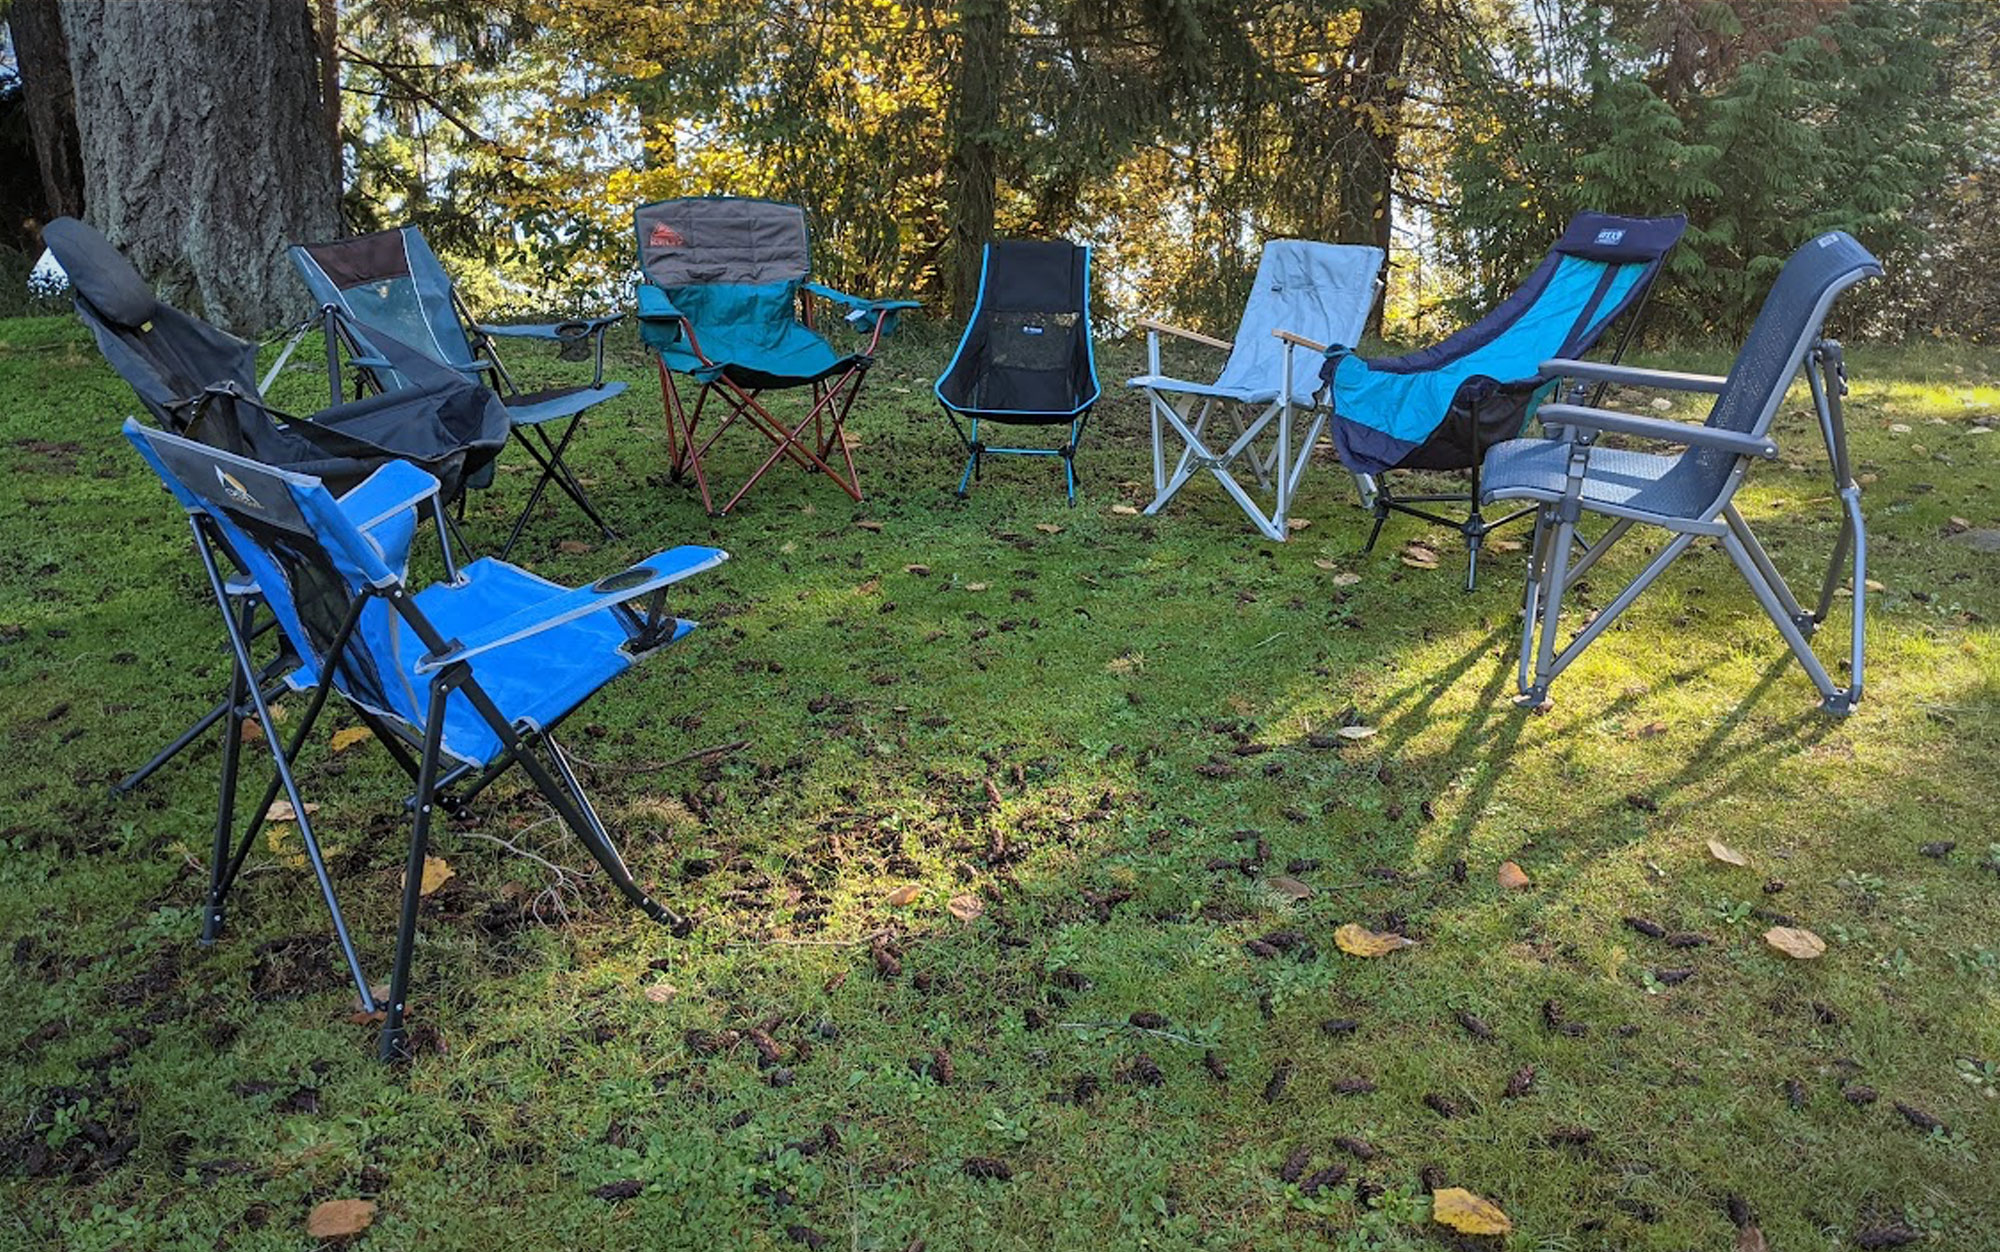 The Best Camping Chairs of 2024